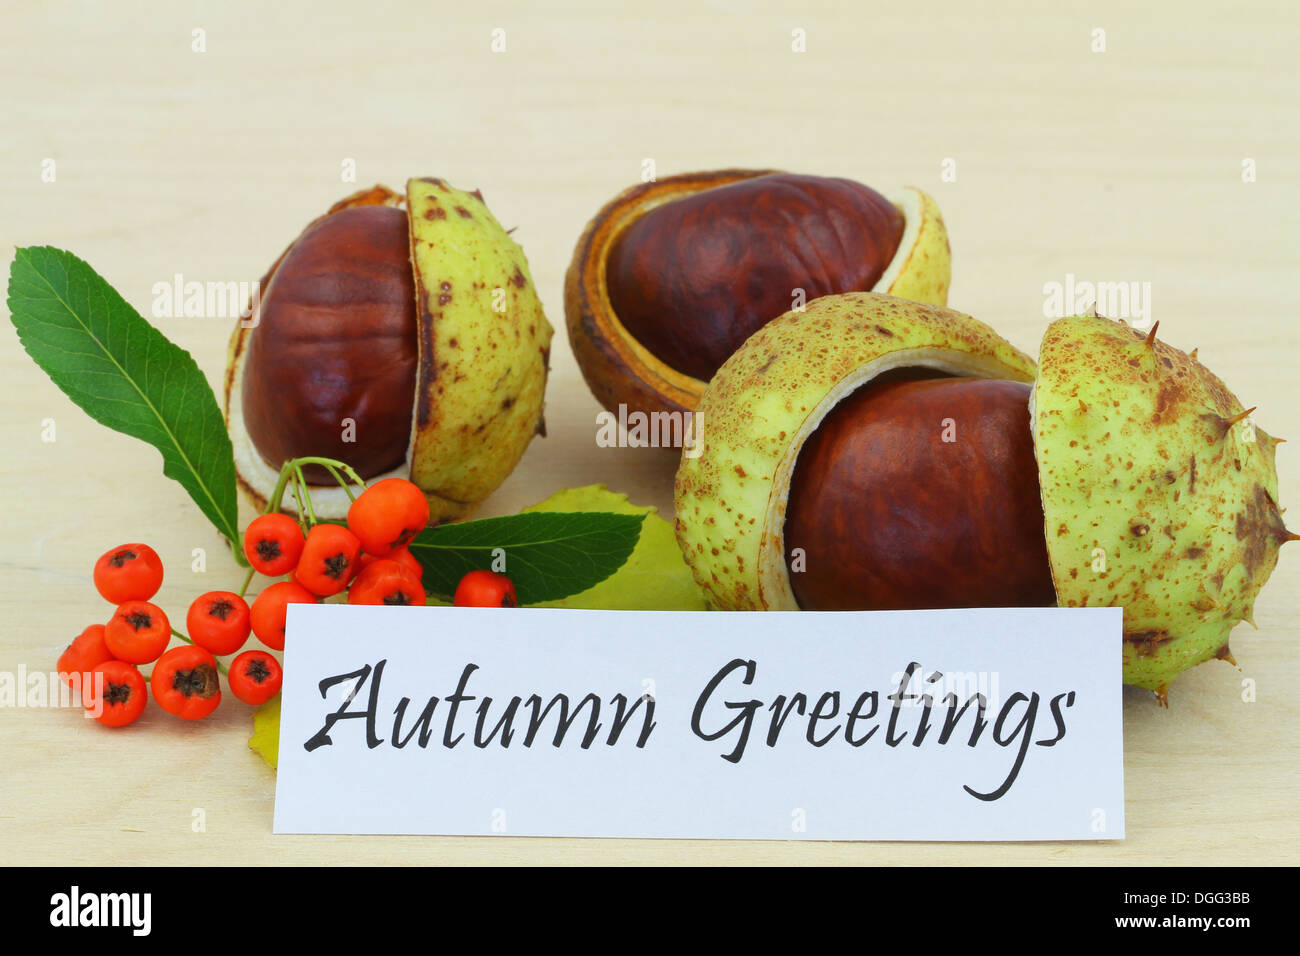 Autumn greetings card with chestnuts and rowan berries Stock Photo